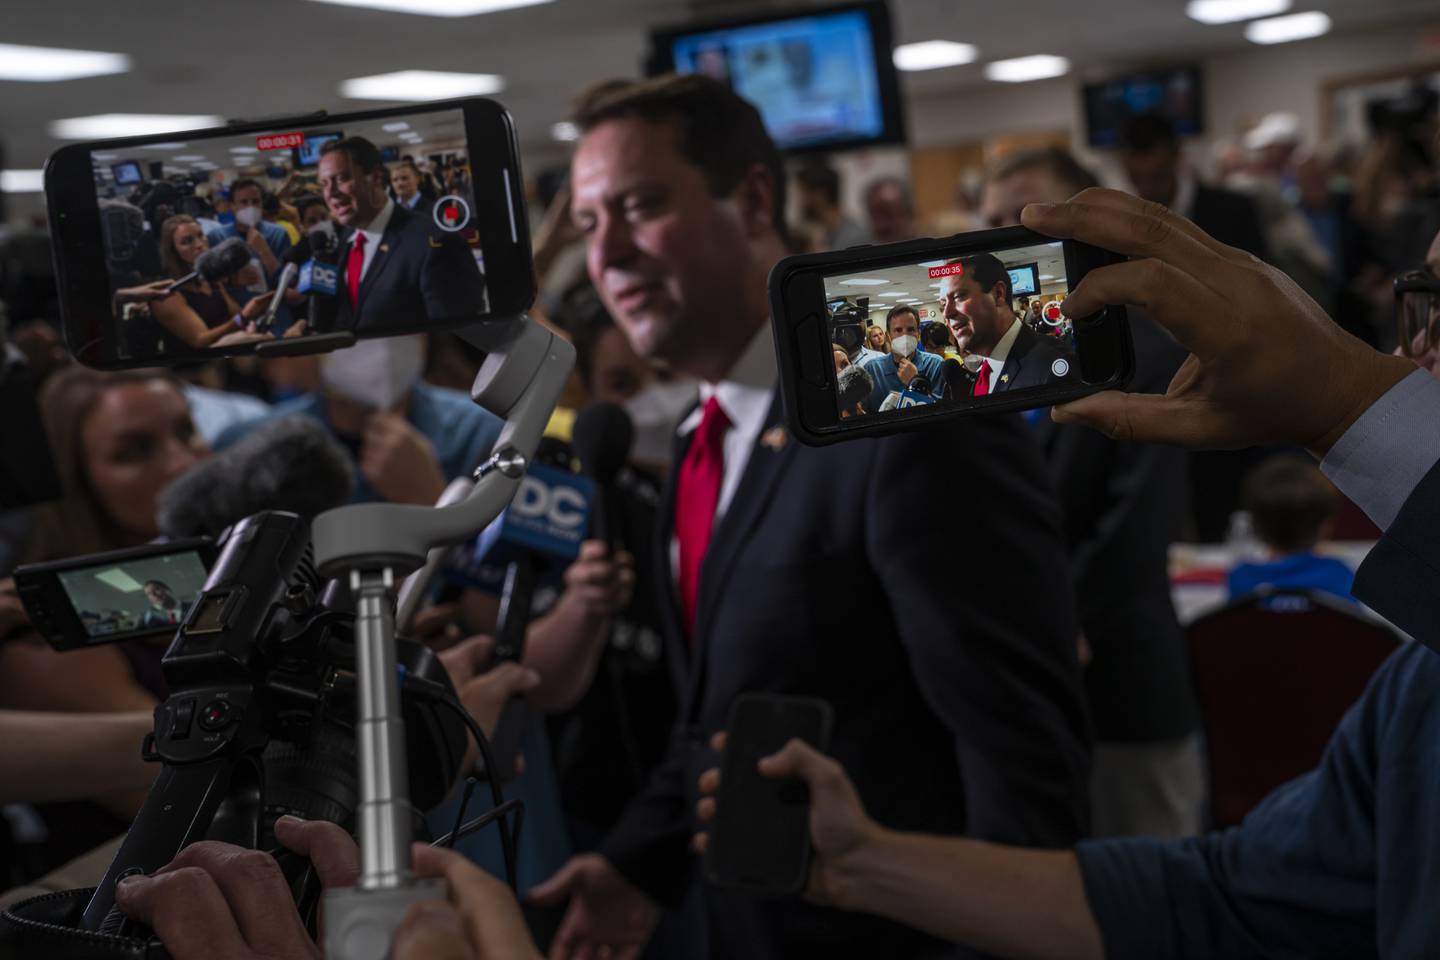 Dan Cox, a candidate for the Republican gubernatorial nomination, speaks with reporters during a primary election night event on July 19, 2022 in Emmitsburg, Maryland. Voters will choose candidates during the primary for governor and seats in the House of Representatives in the upcoming November election.